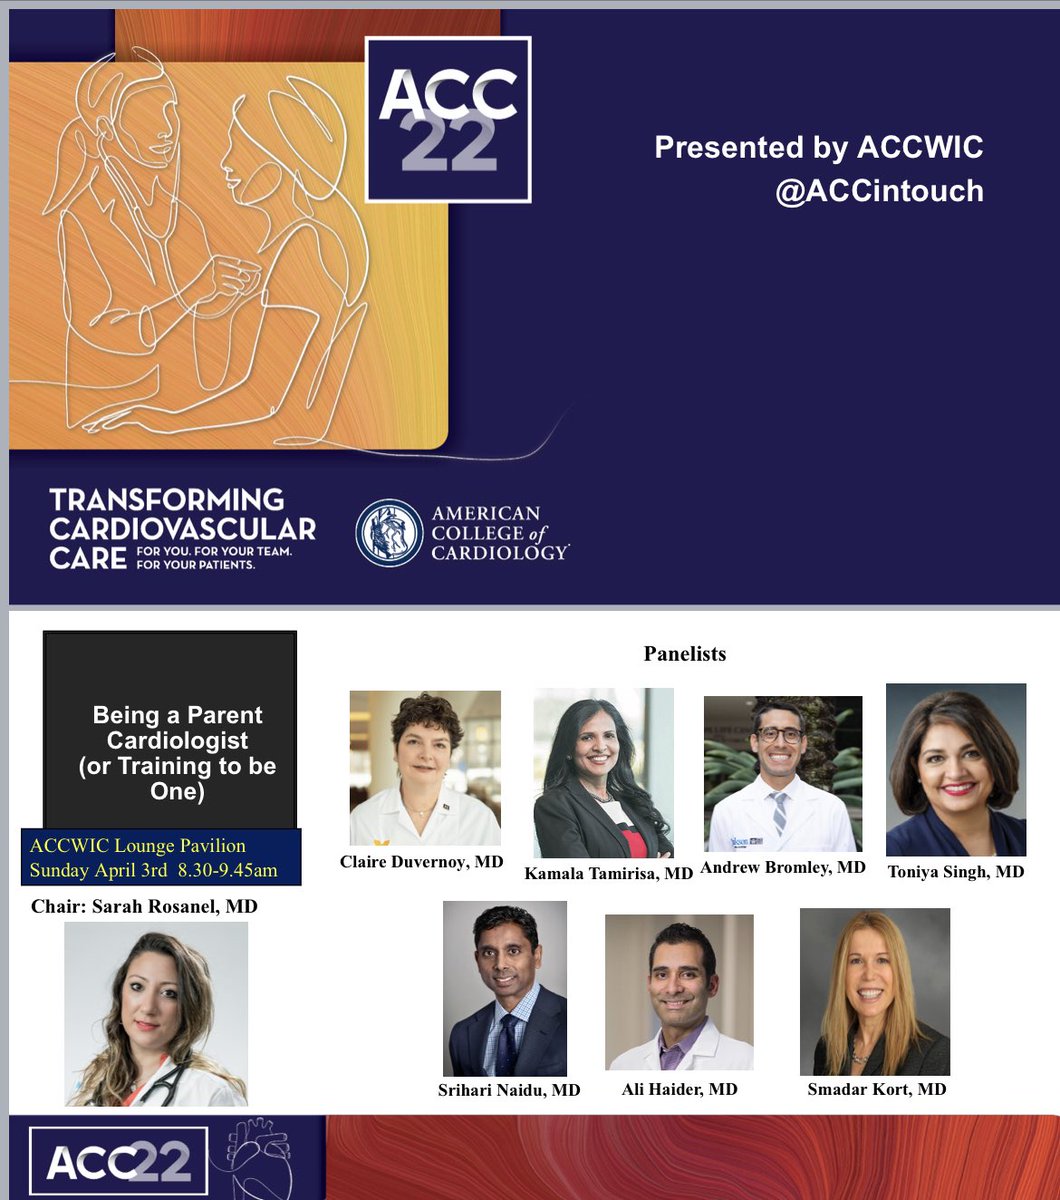 Being a Parent Cardiologist! For those interested to hear about the fine juggling act of parenthood and having a demanding career: please come on Sunday to our session! #ACC22 #ACCWIC @ACCinTouch